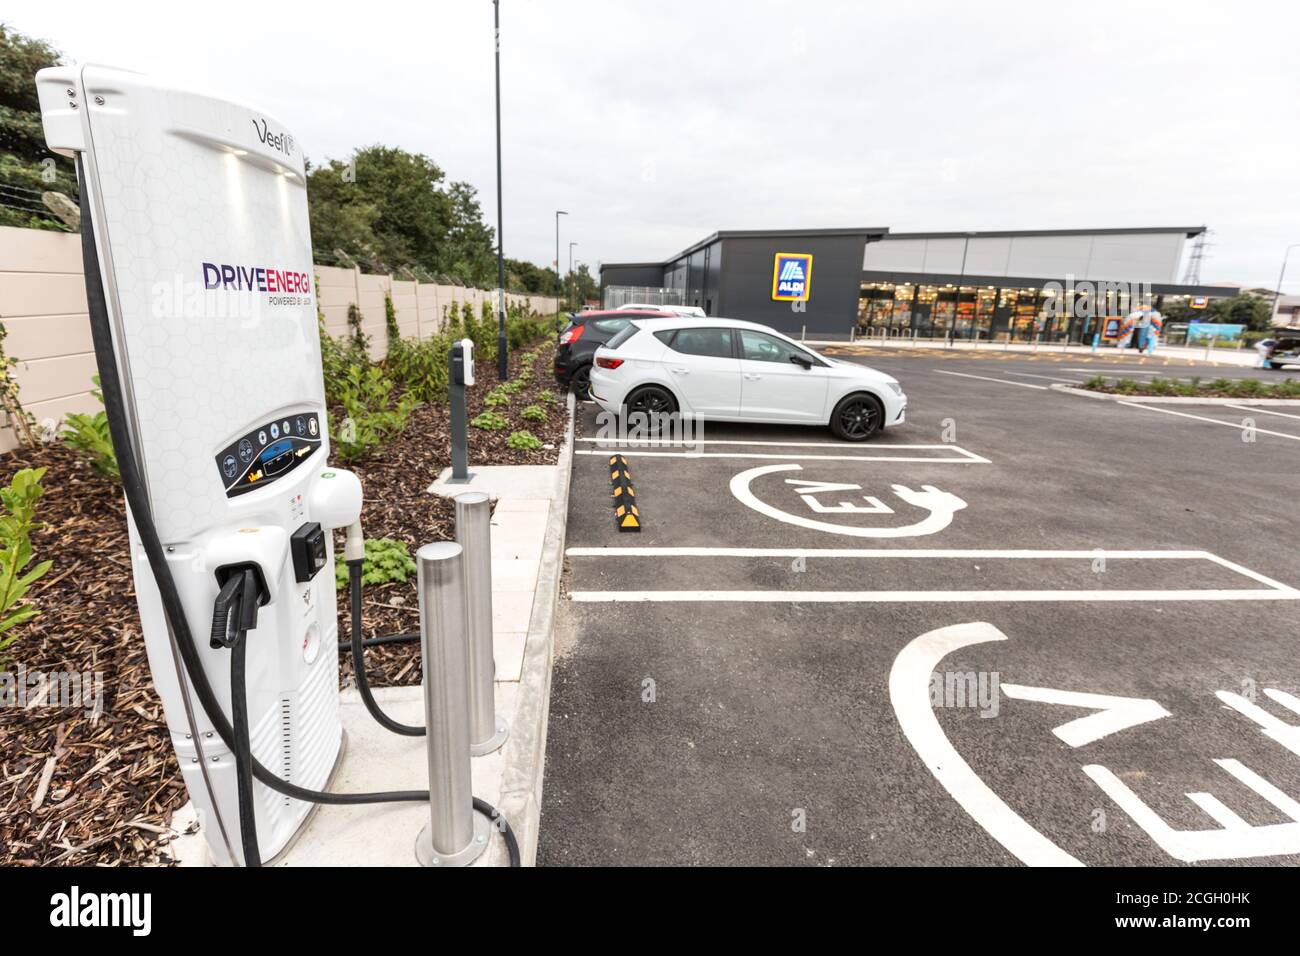 Aldi Supermarket car park with electric vehicle charging point Stock Photo